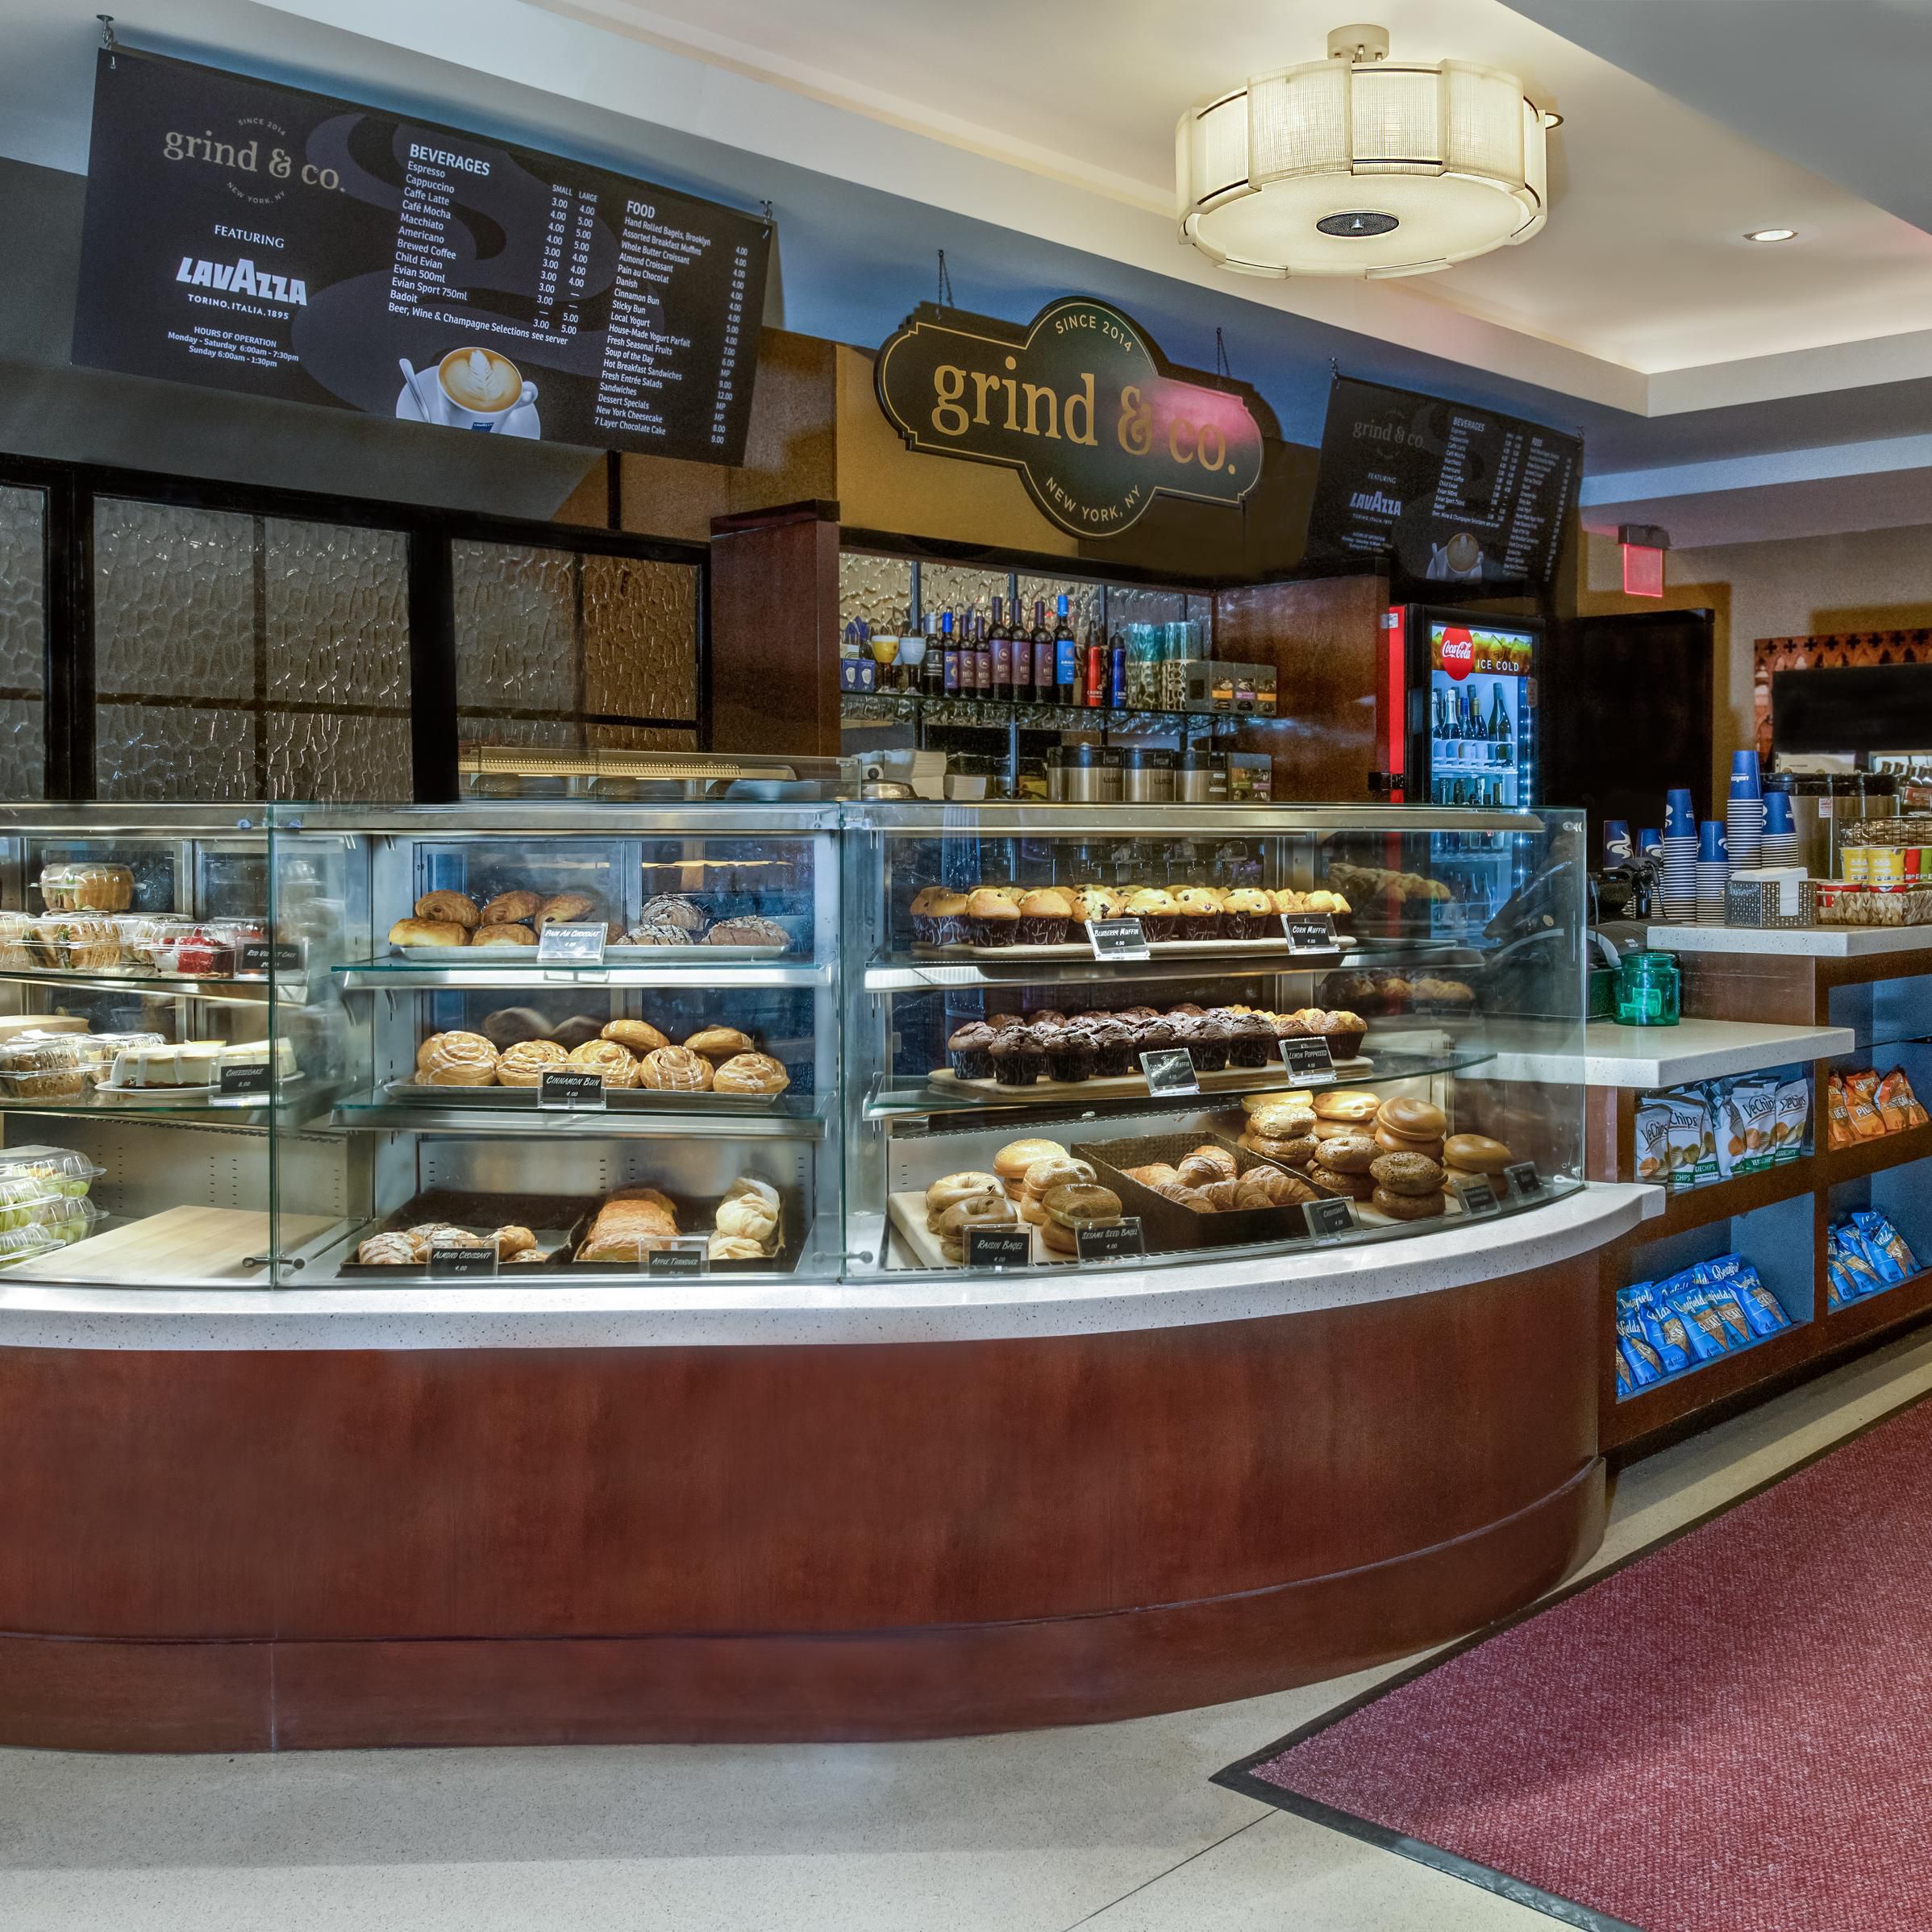 Grab a quick bite &amp; coffee at grind &amp; co on the lobby level!